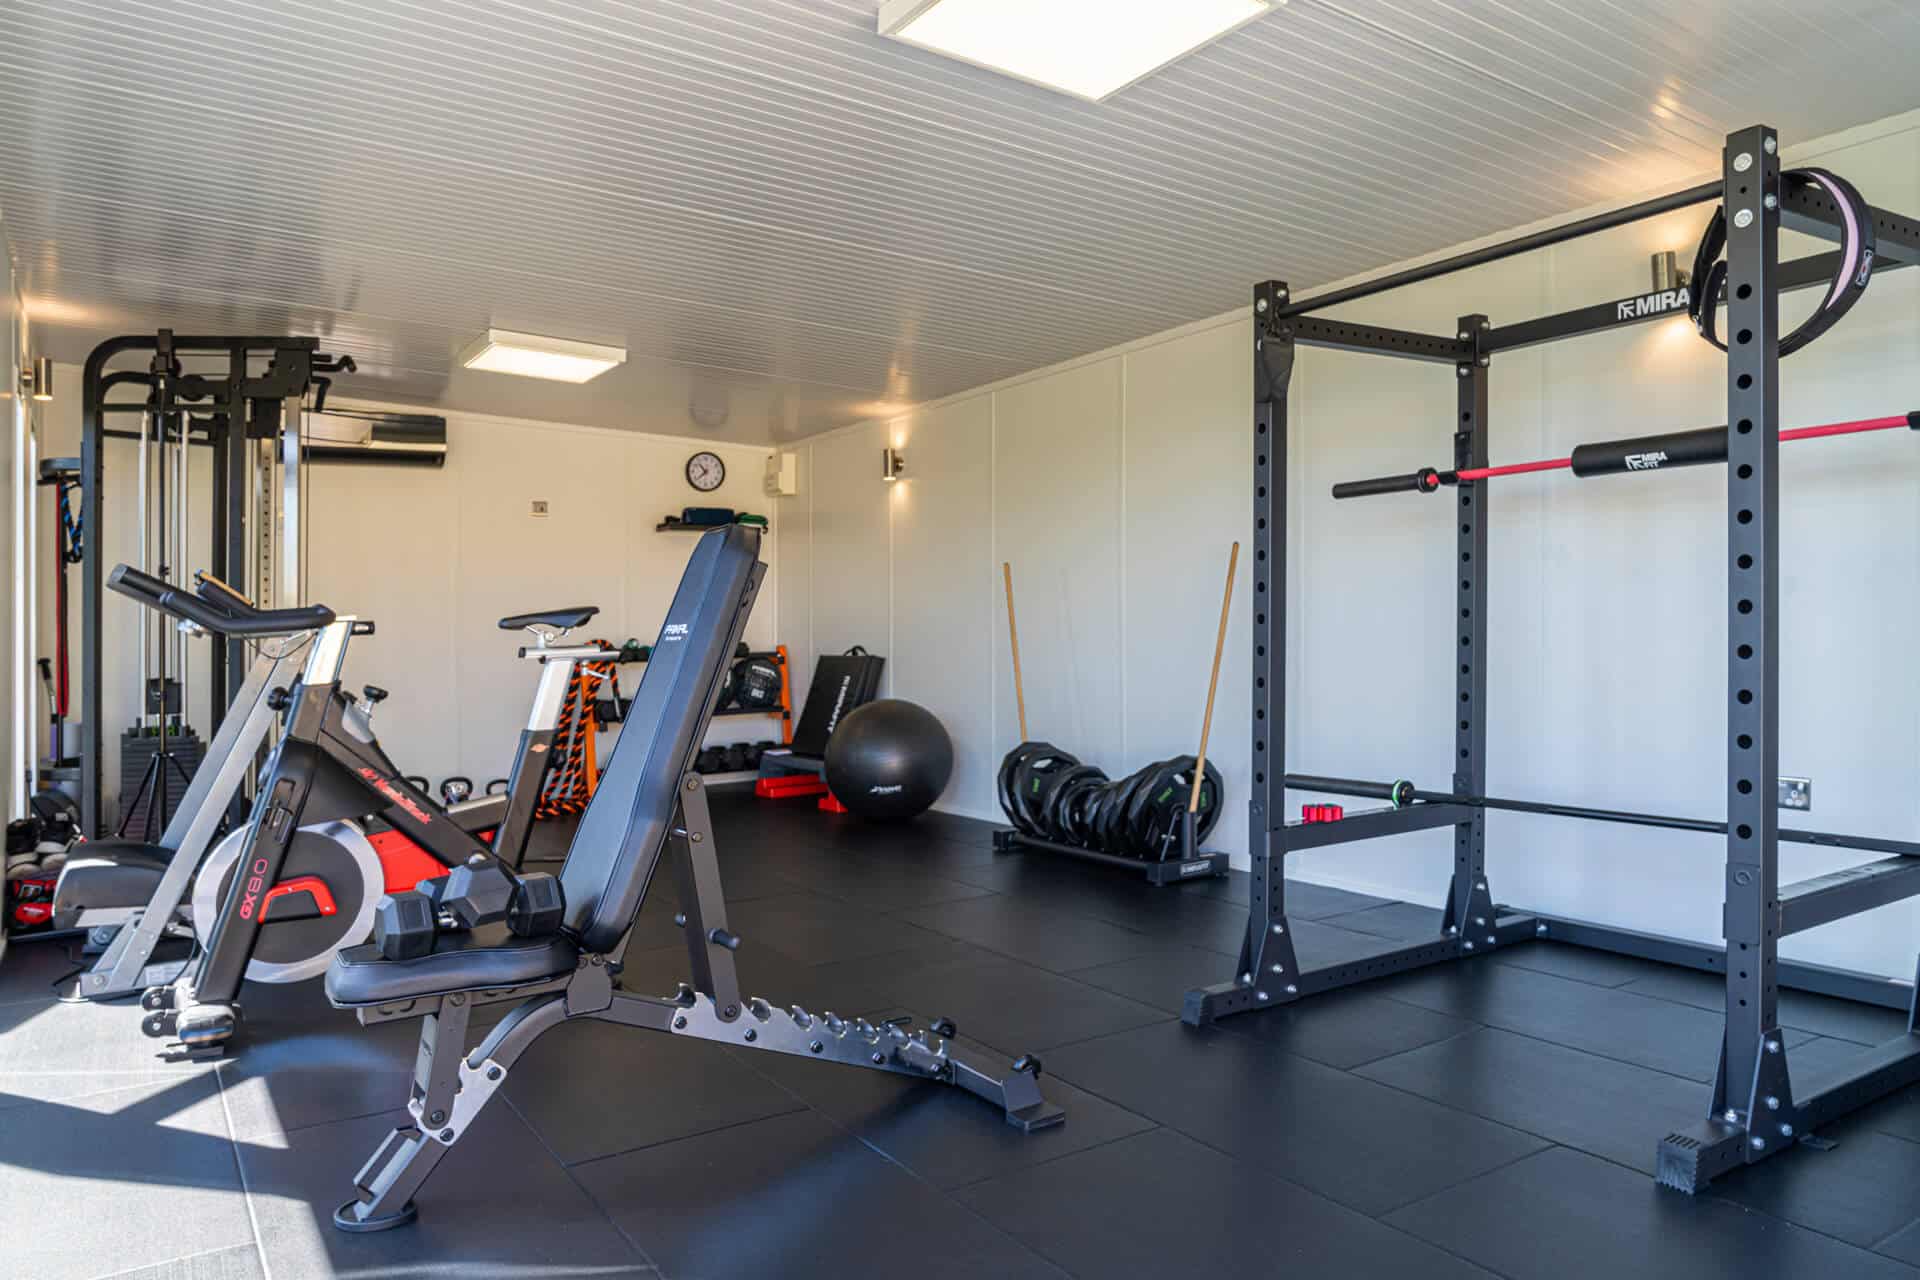 Gym equipment including weights, t-bar and bike positioned in home gym that has white interior walls.